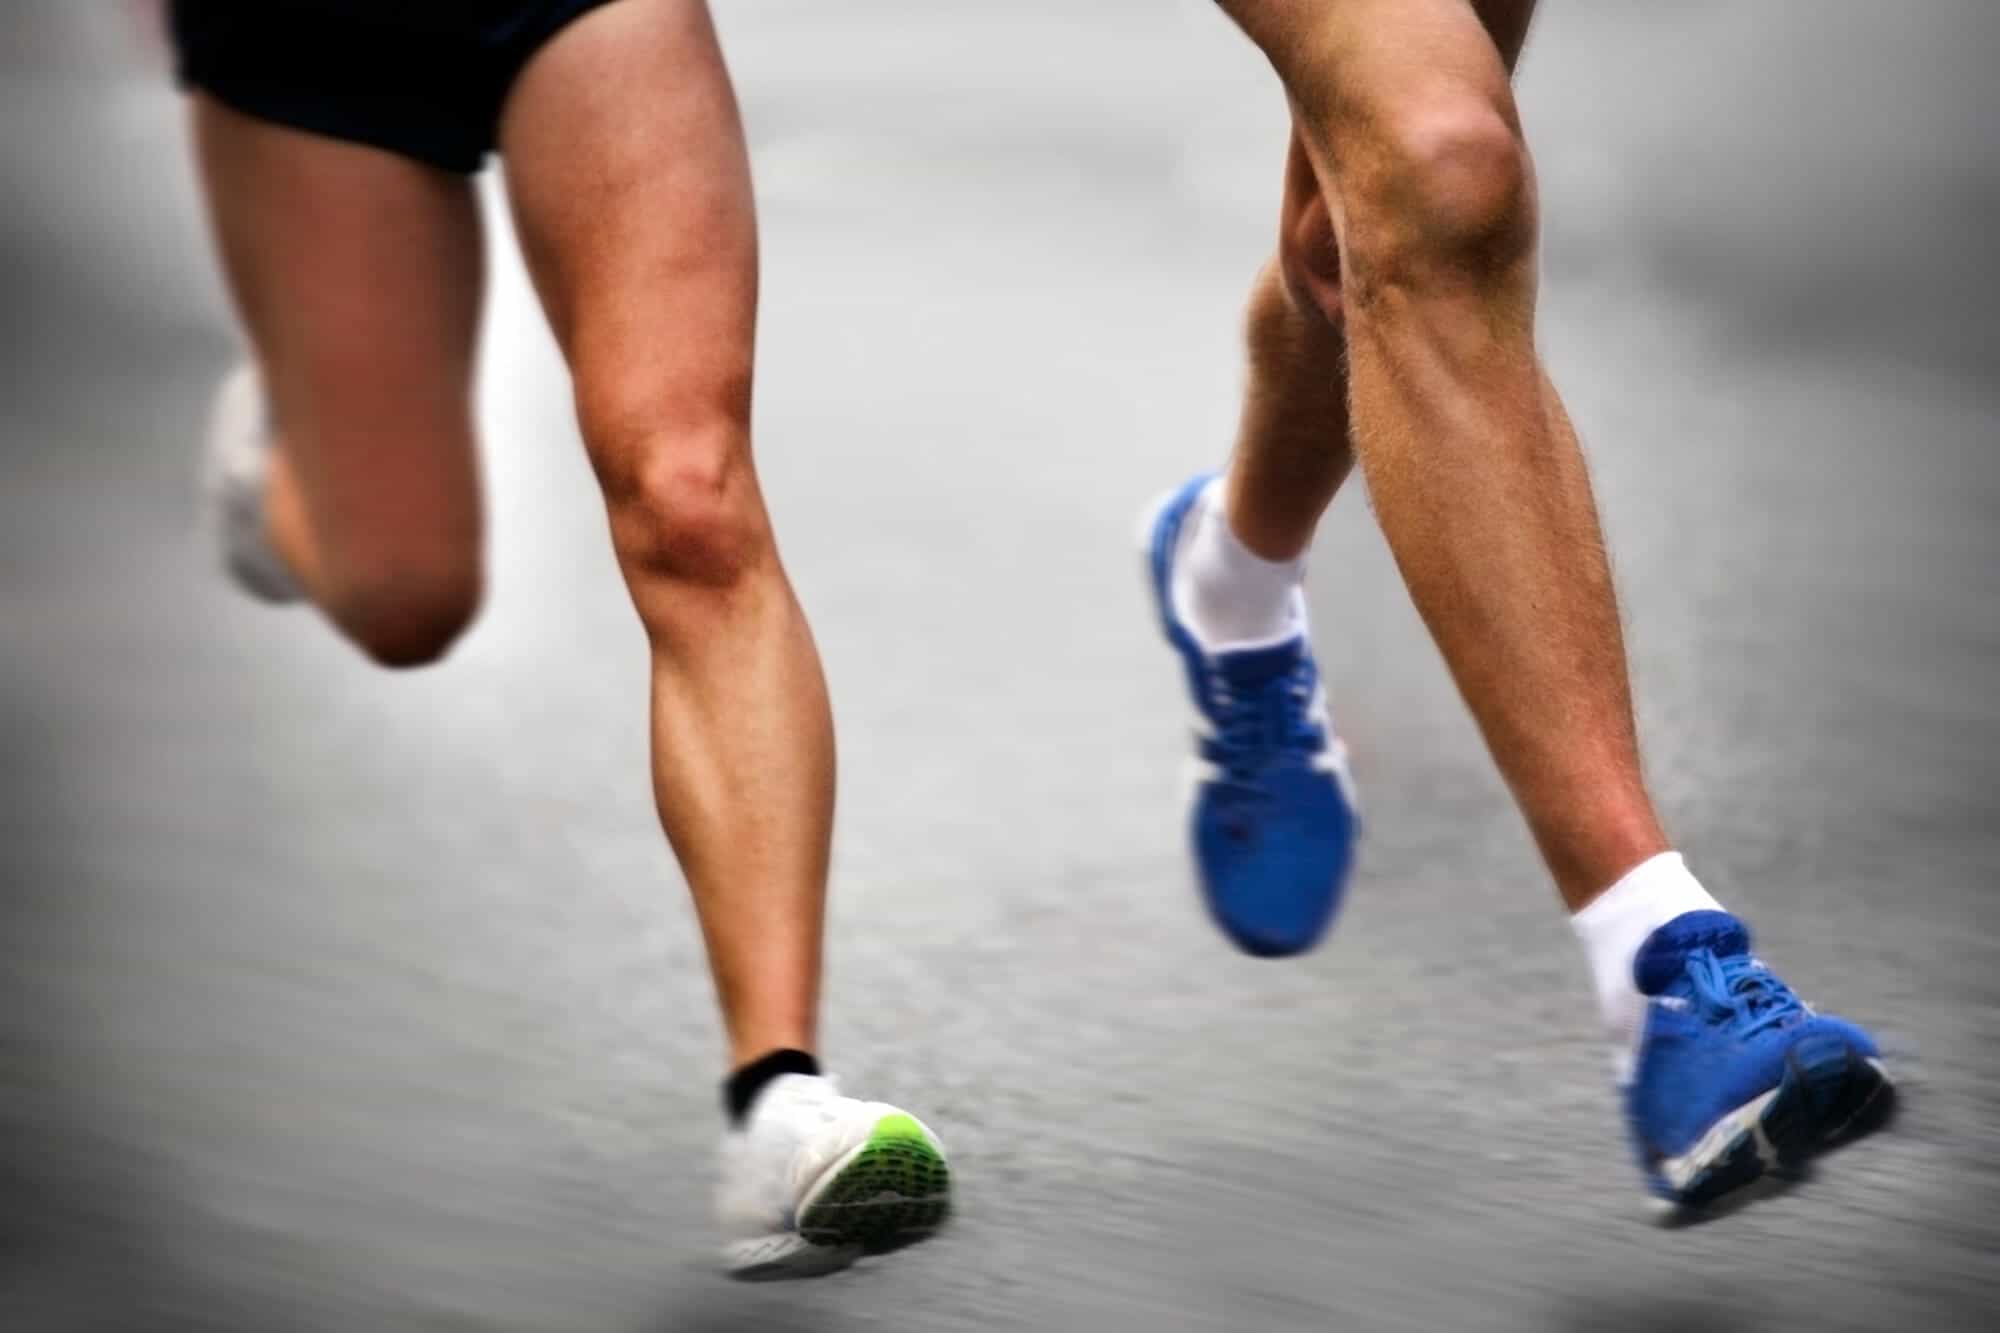 how many calories are burned running a 5k: Speed